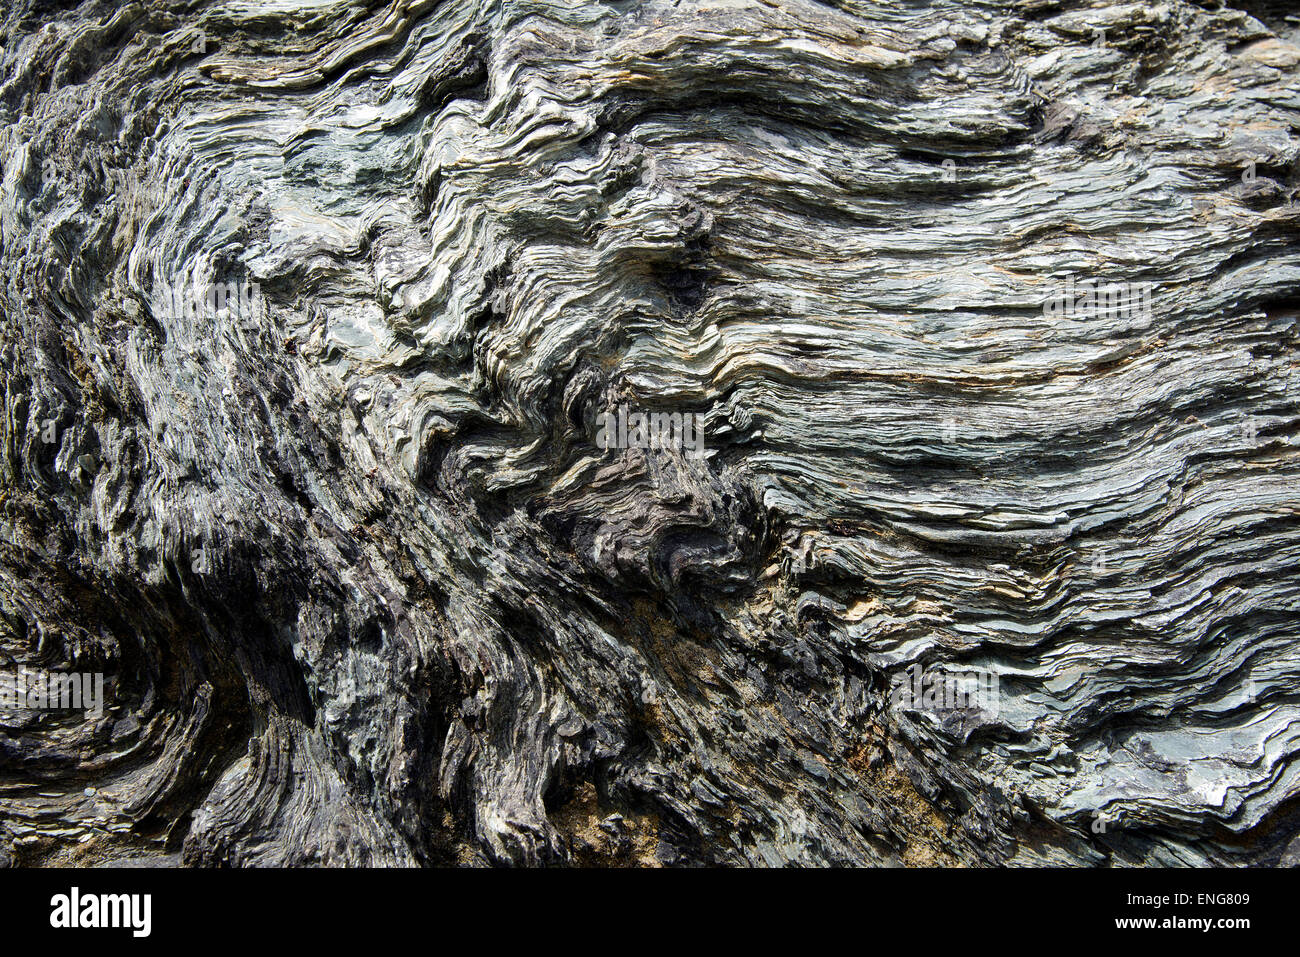 Rock formation showing intense folding in strata Tierra del Fuego Argentina Stock Photo